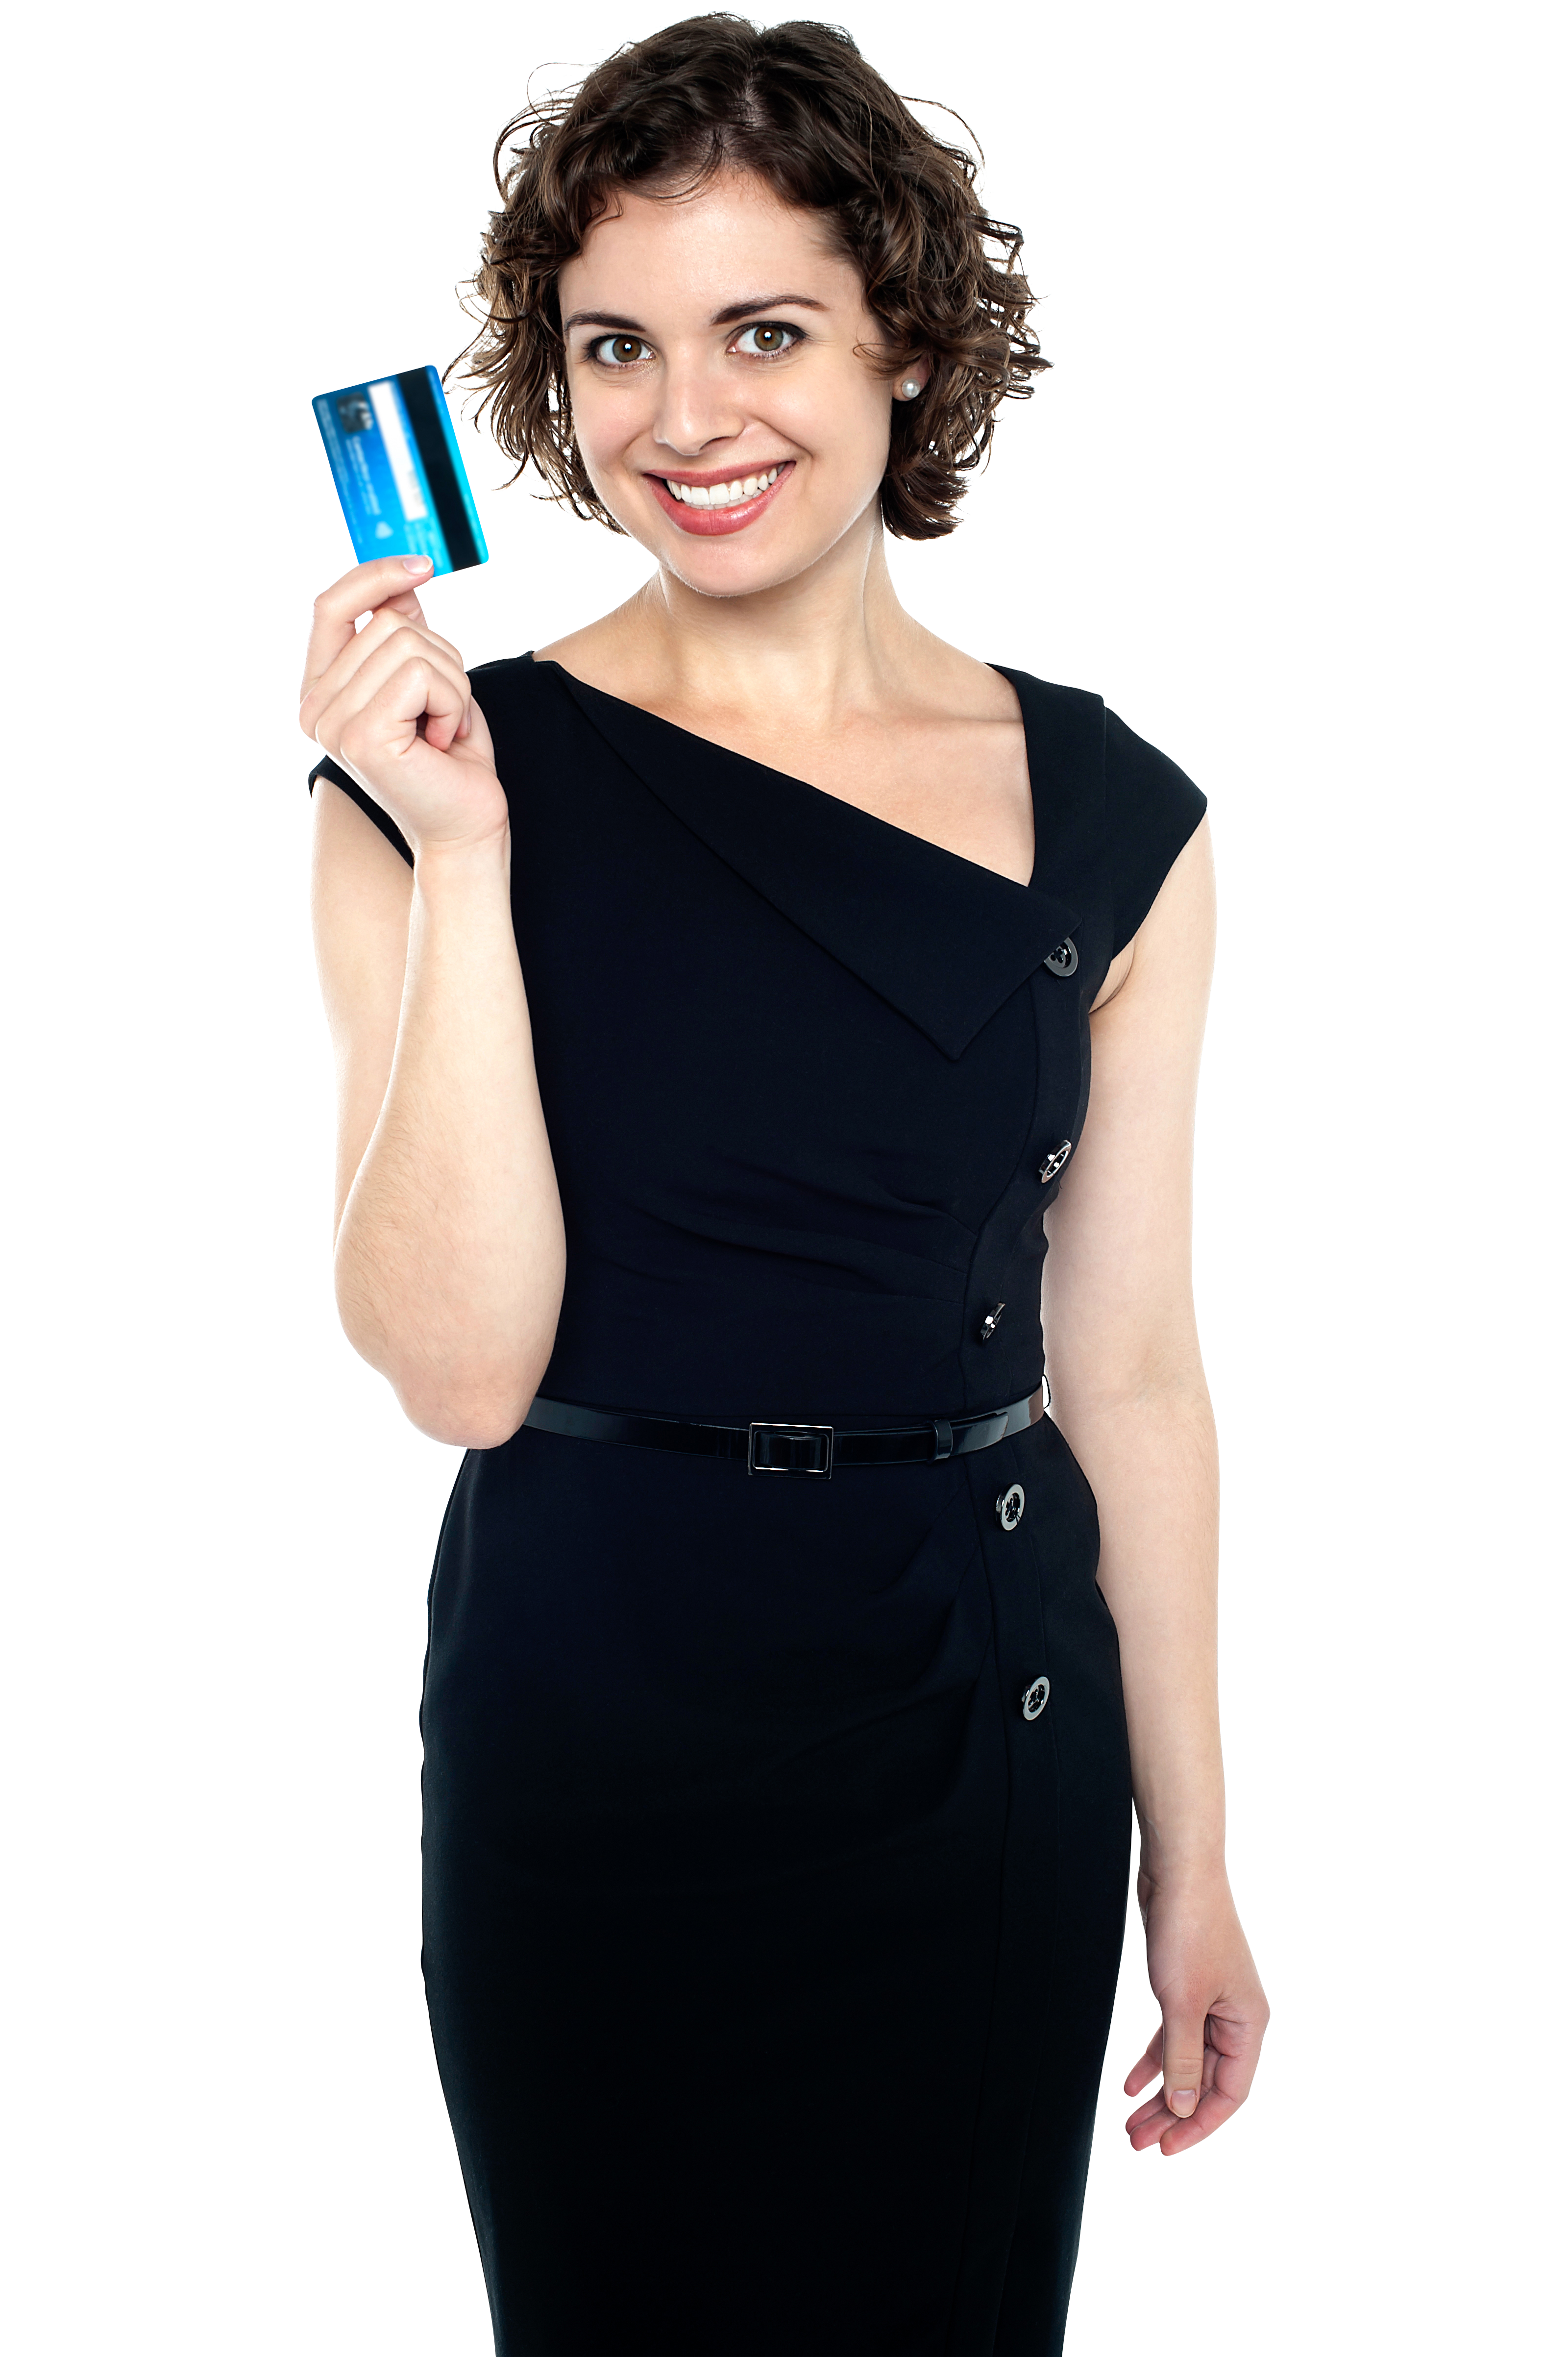 Women Holding Credit Card PNG Image